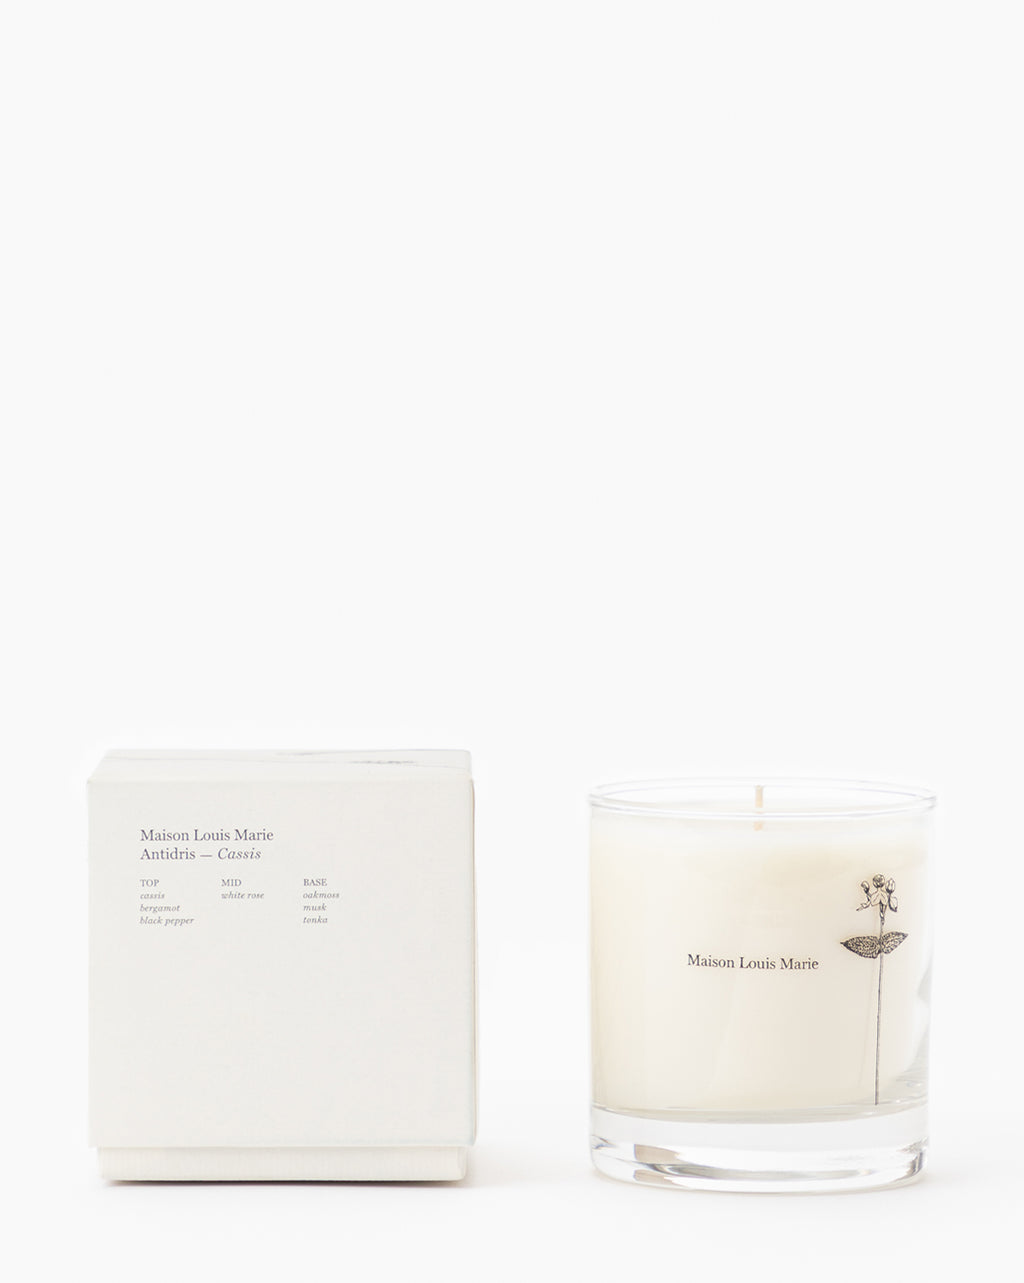 Maison Louis Marie Candle – McGee & Co.